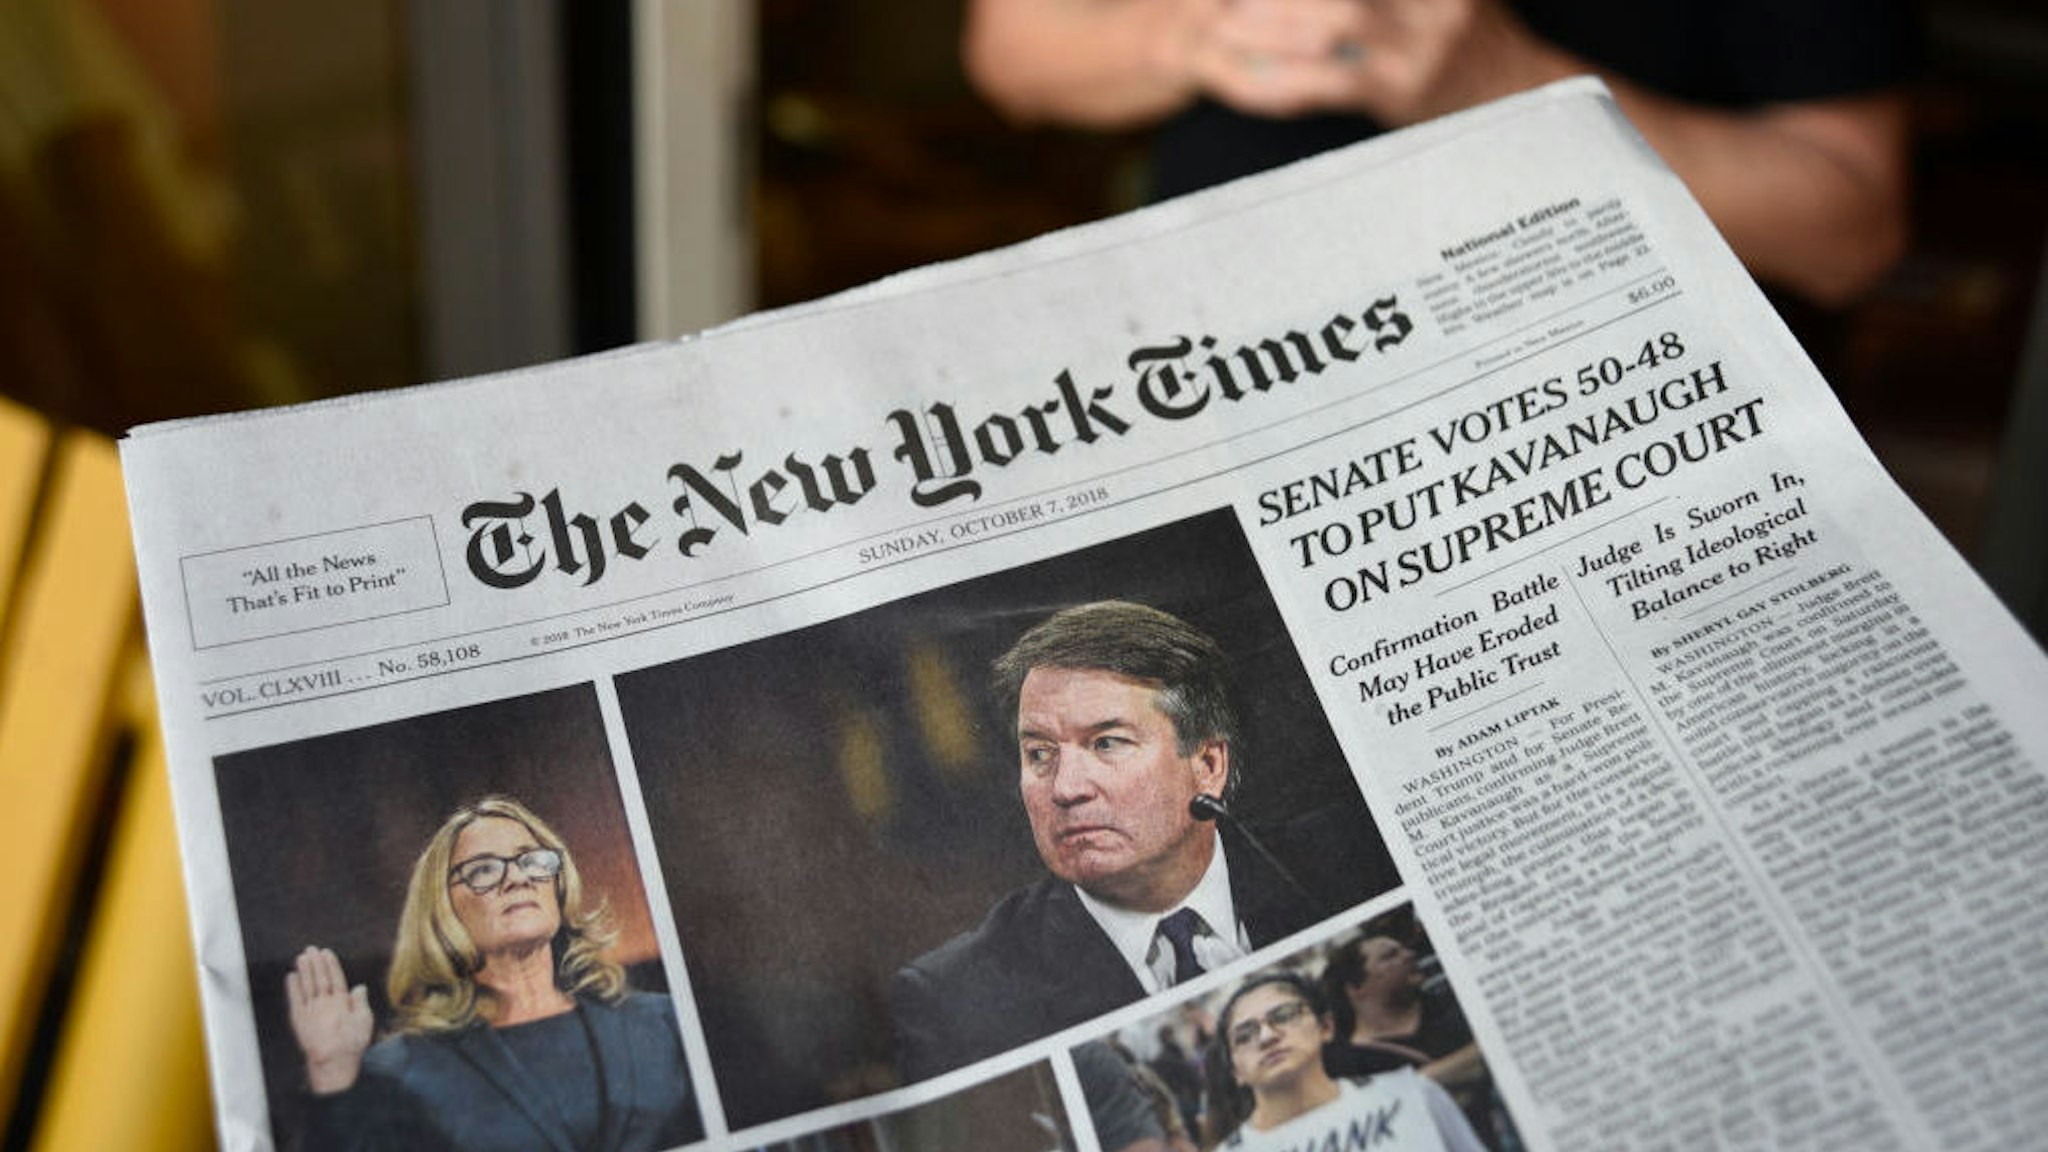 The headline on the front page of The New York Times declares that the United States Senate confirmed the nonination of Brent Kavanaugh to the U.S. Supreme Court.